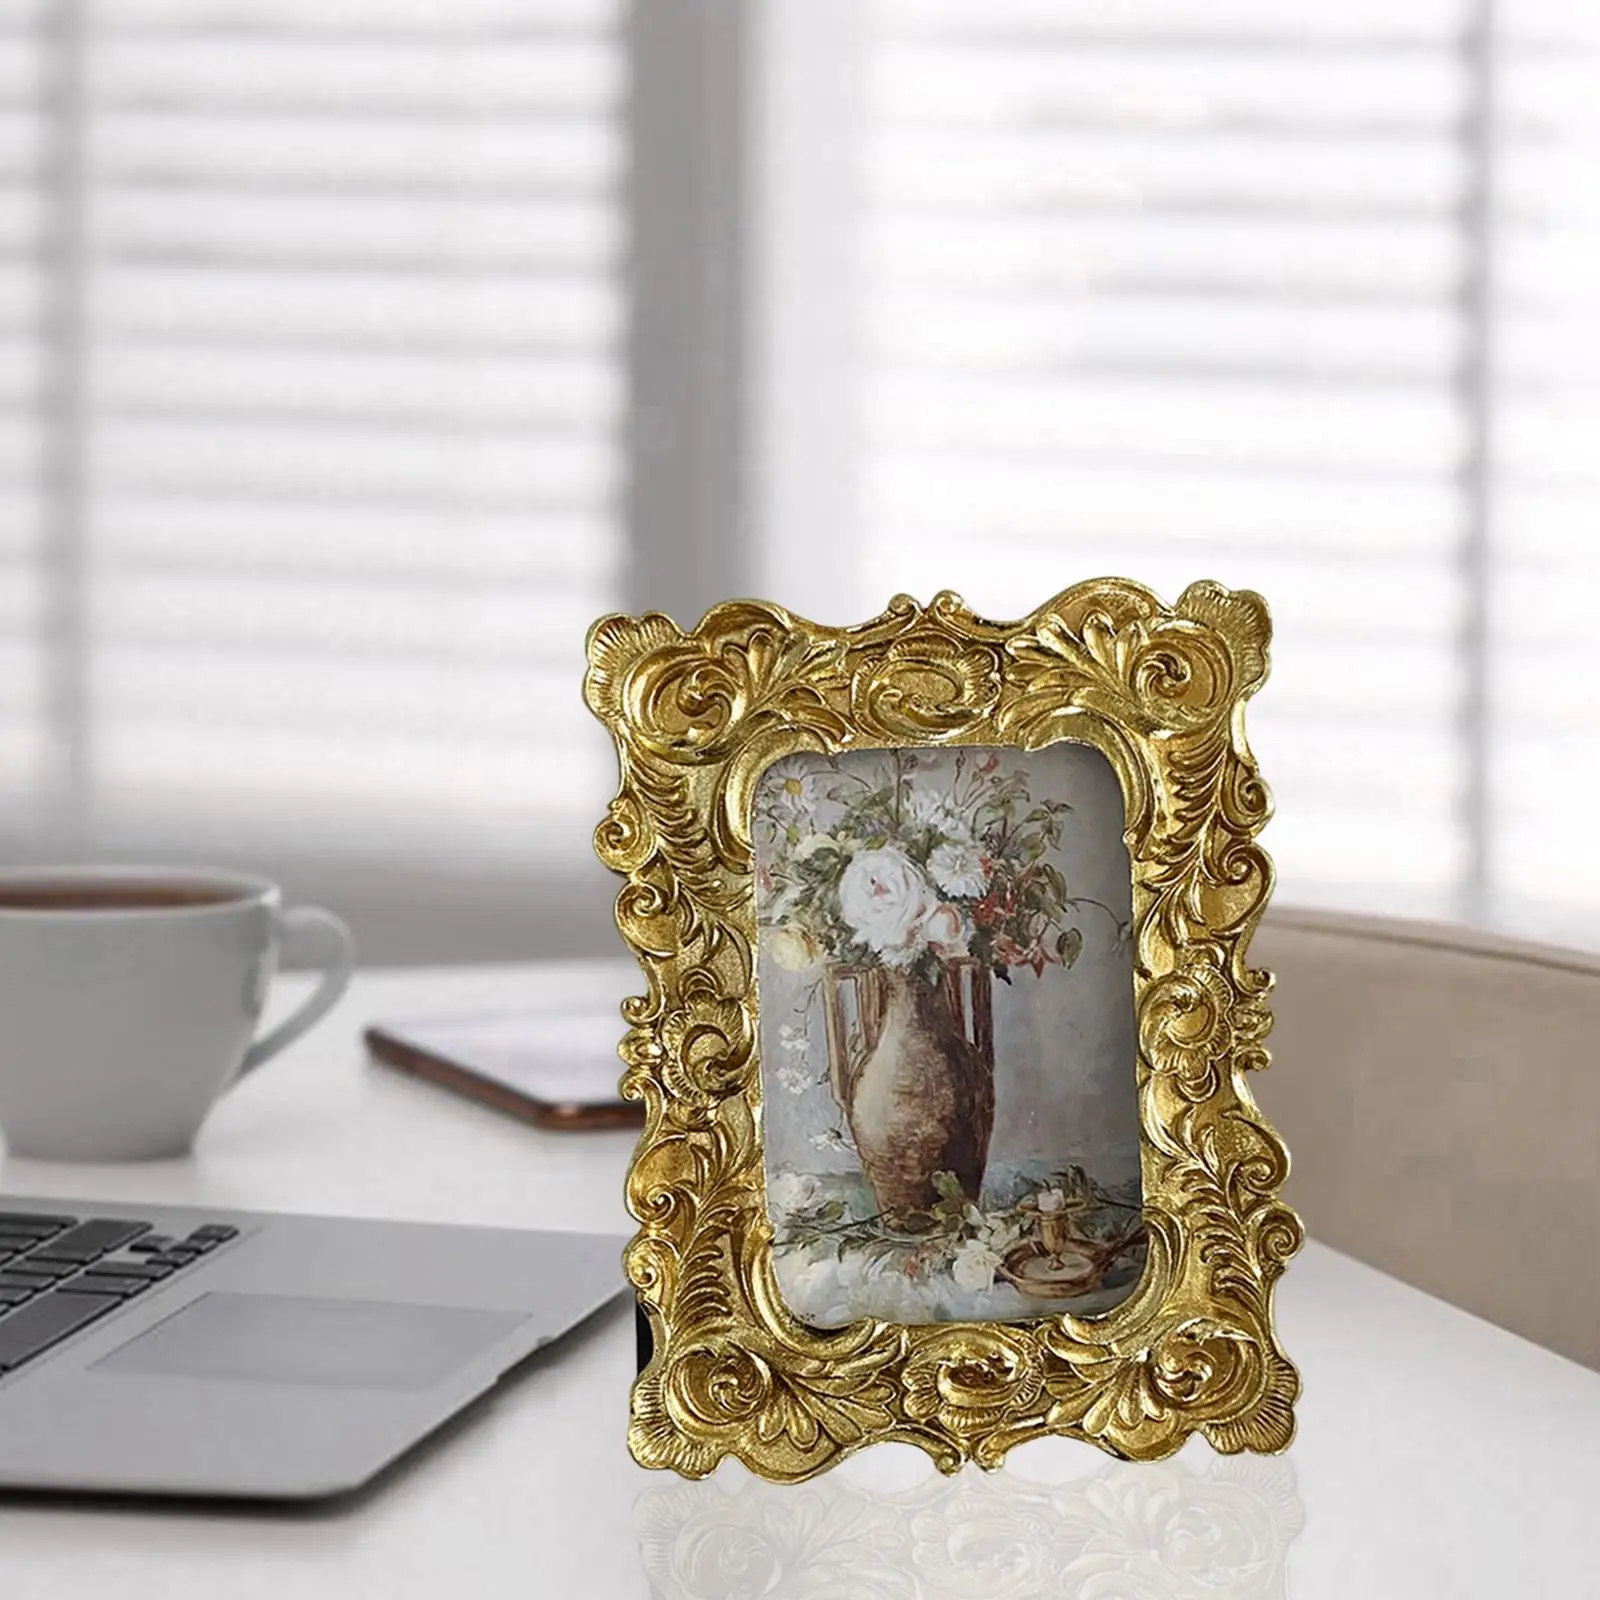 Retro Style Photo Frame Picture Holder Tabletop Wall Mounted Photo Display